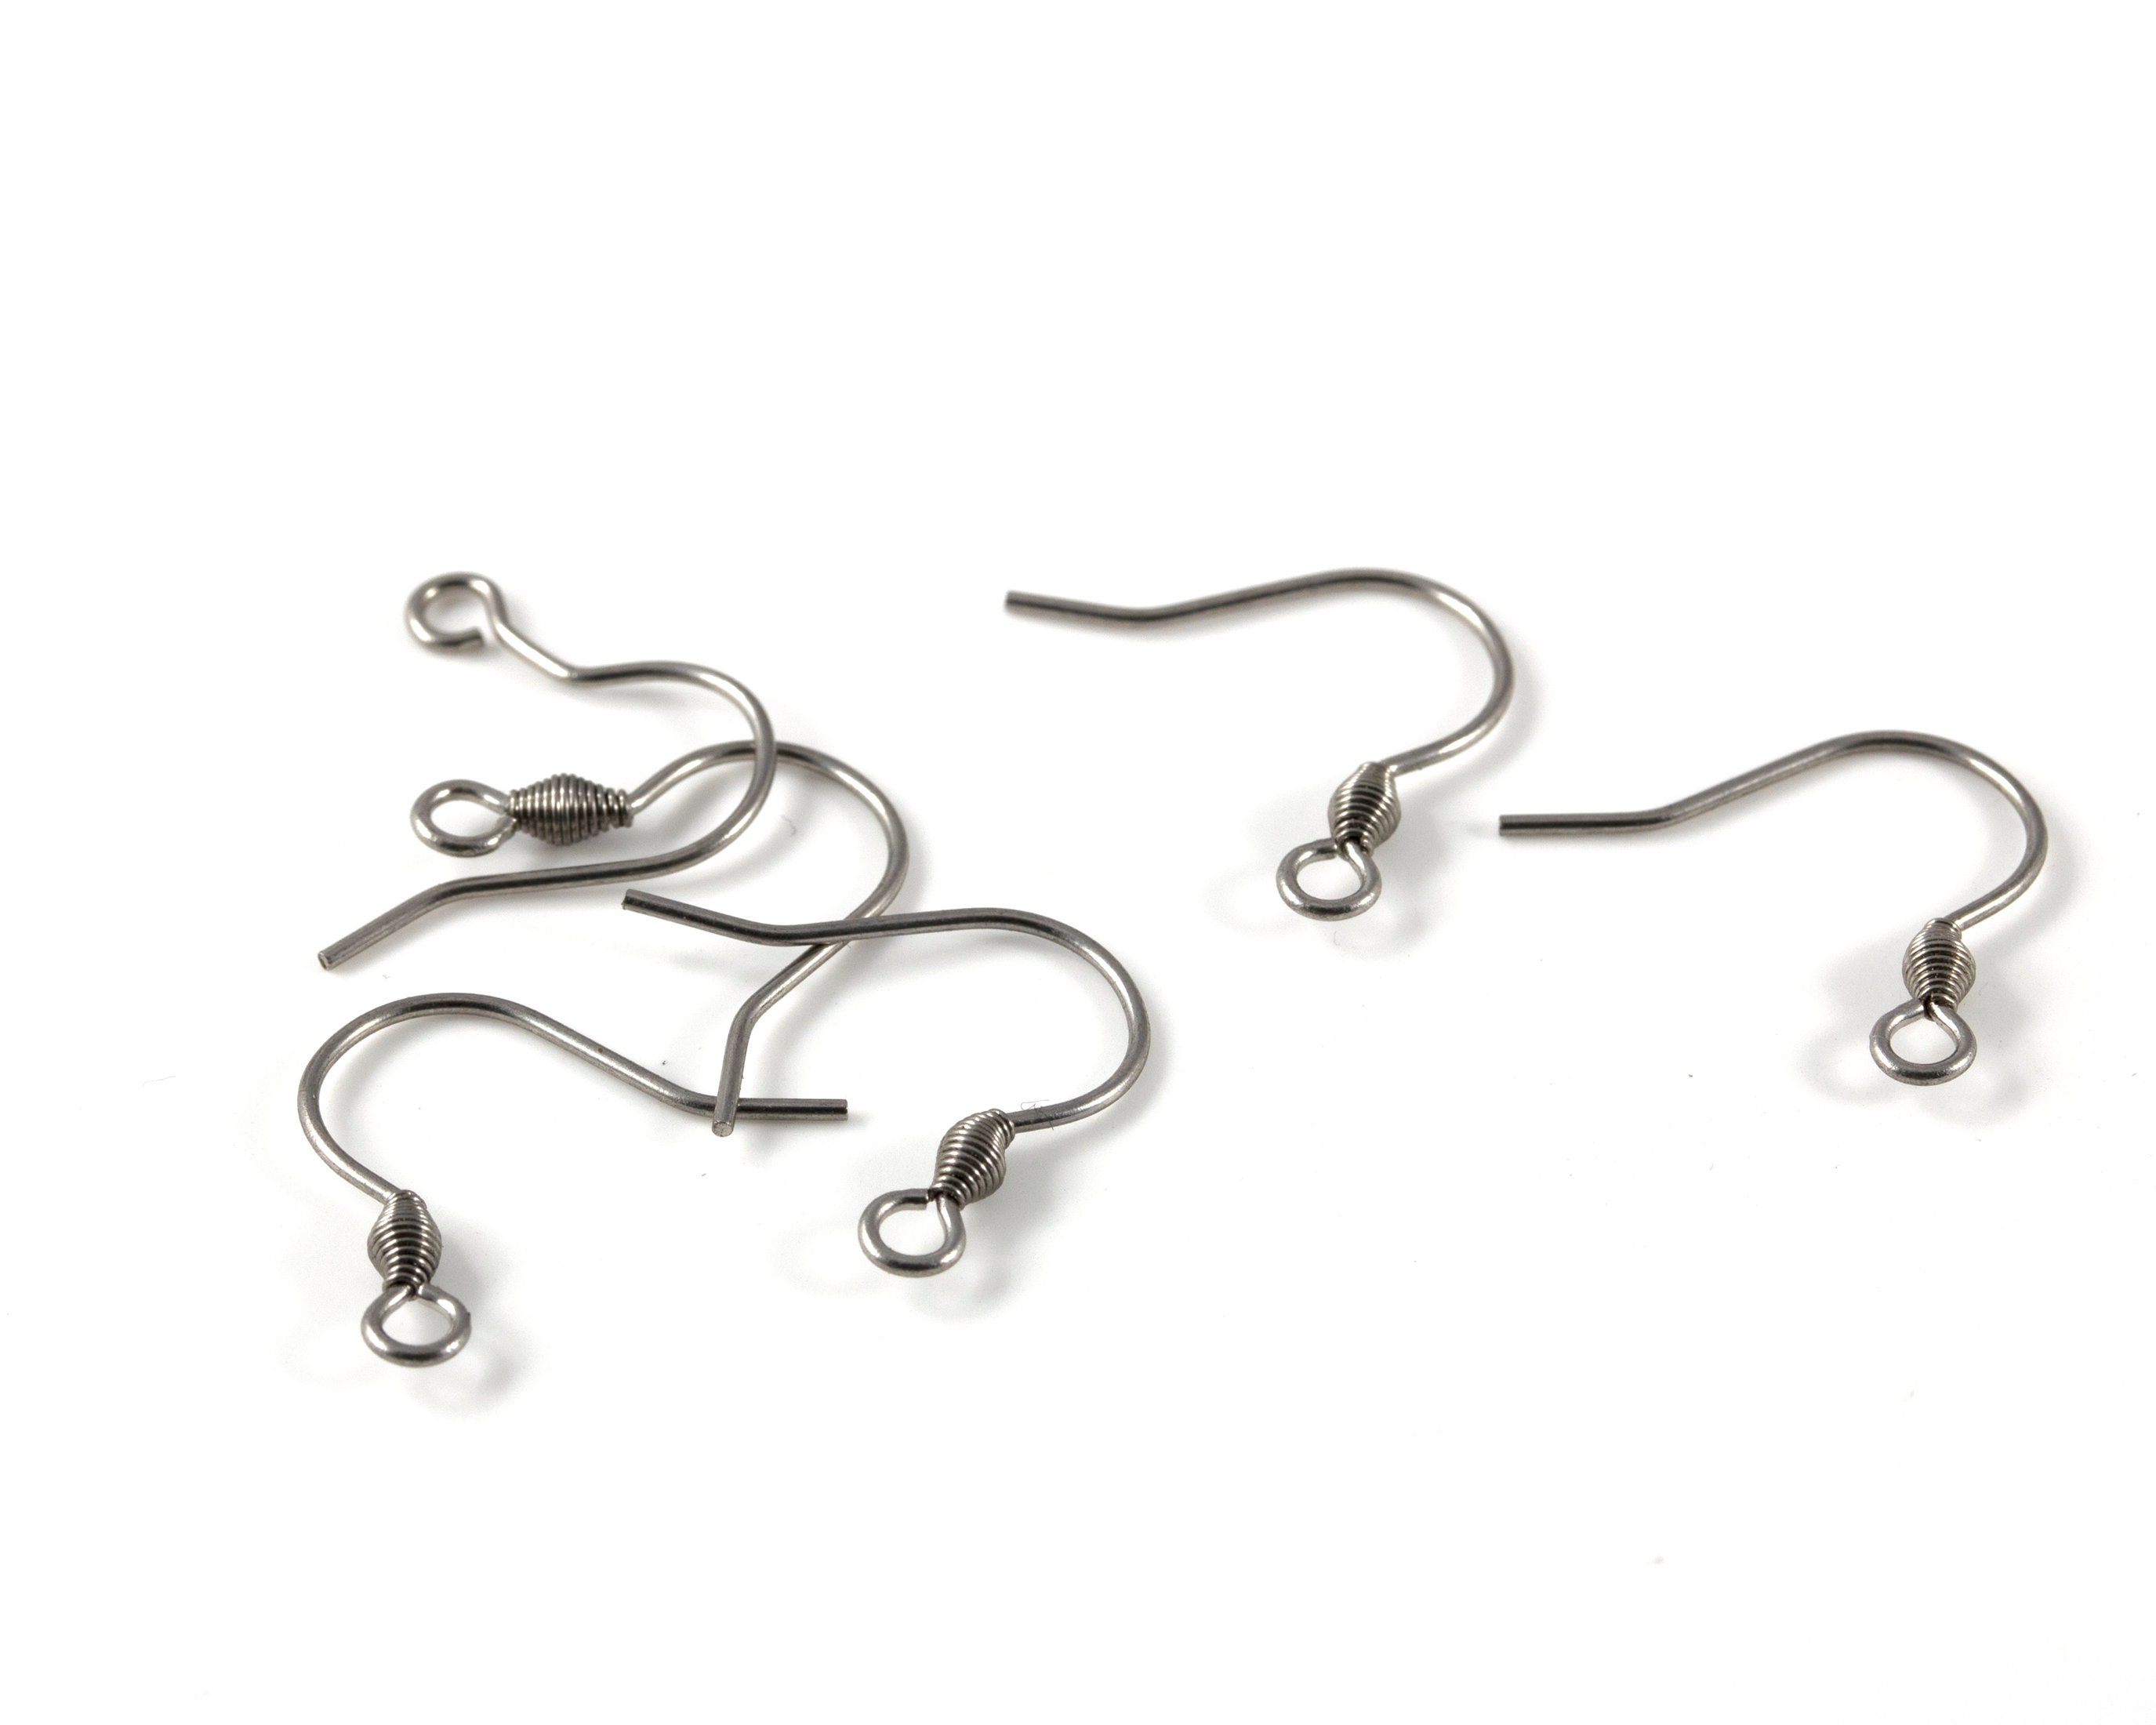 French Ear Wire Hooks Hypo-allergenic Surgical Quality Stainless